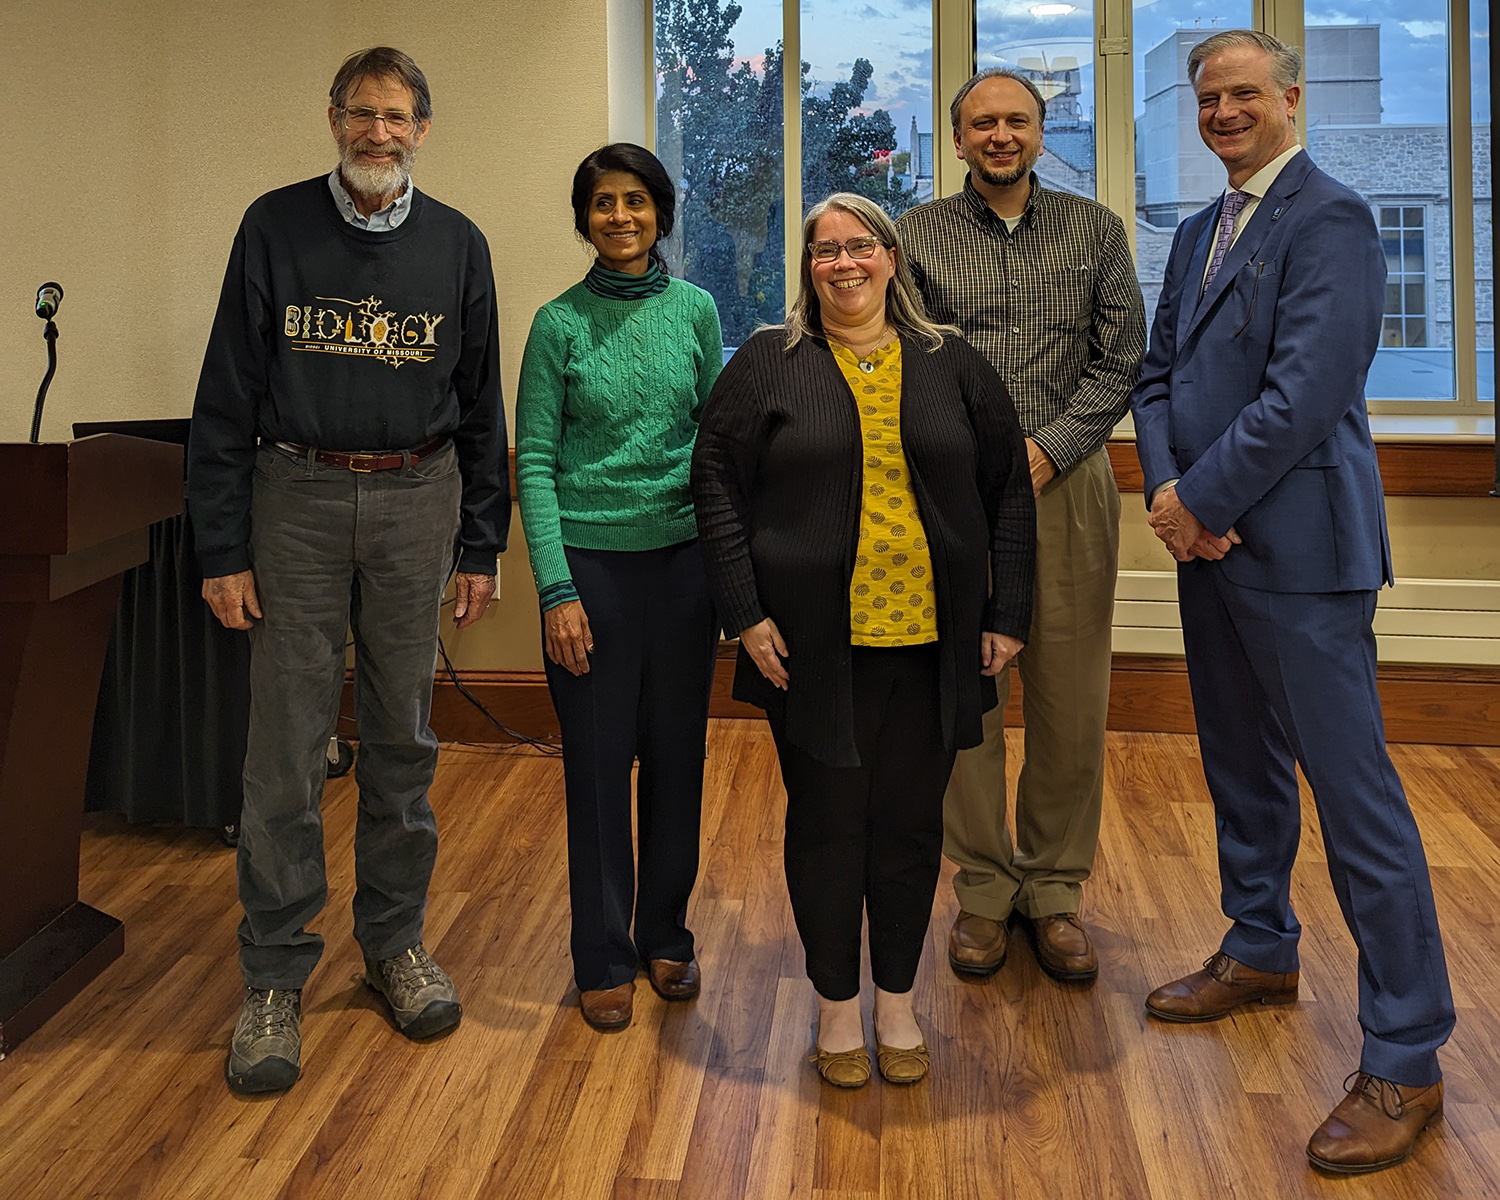 Dr. Brown standing with Dr. George Smith, Dr. Latha Ramchand, Dr. David Schulz, and Dr. Cooper Drury